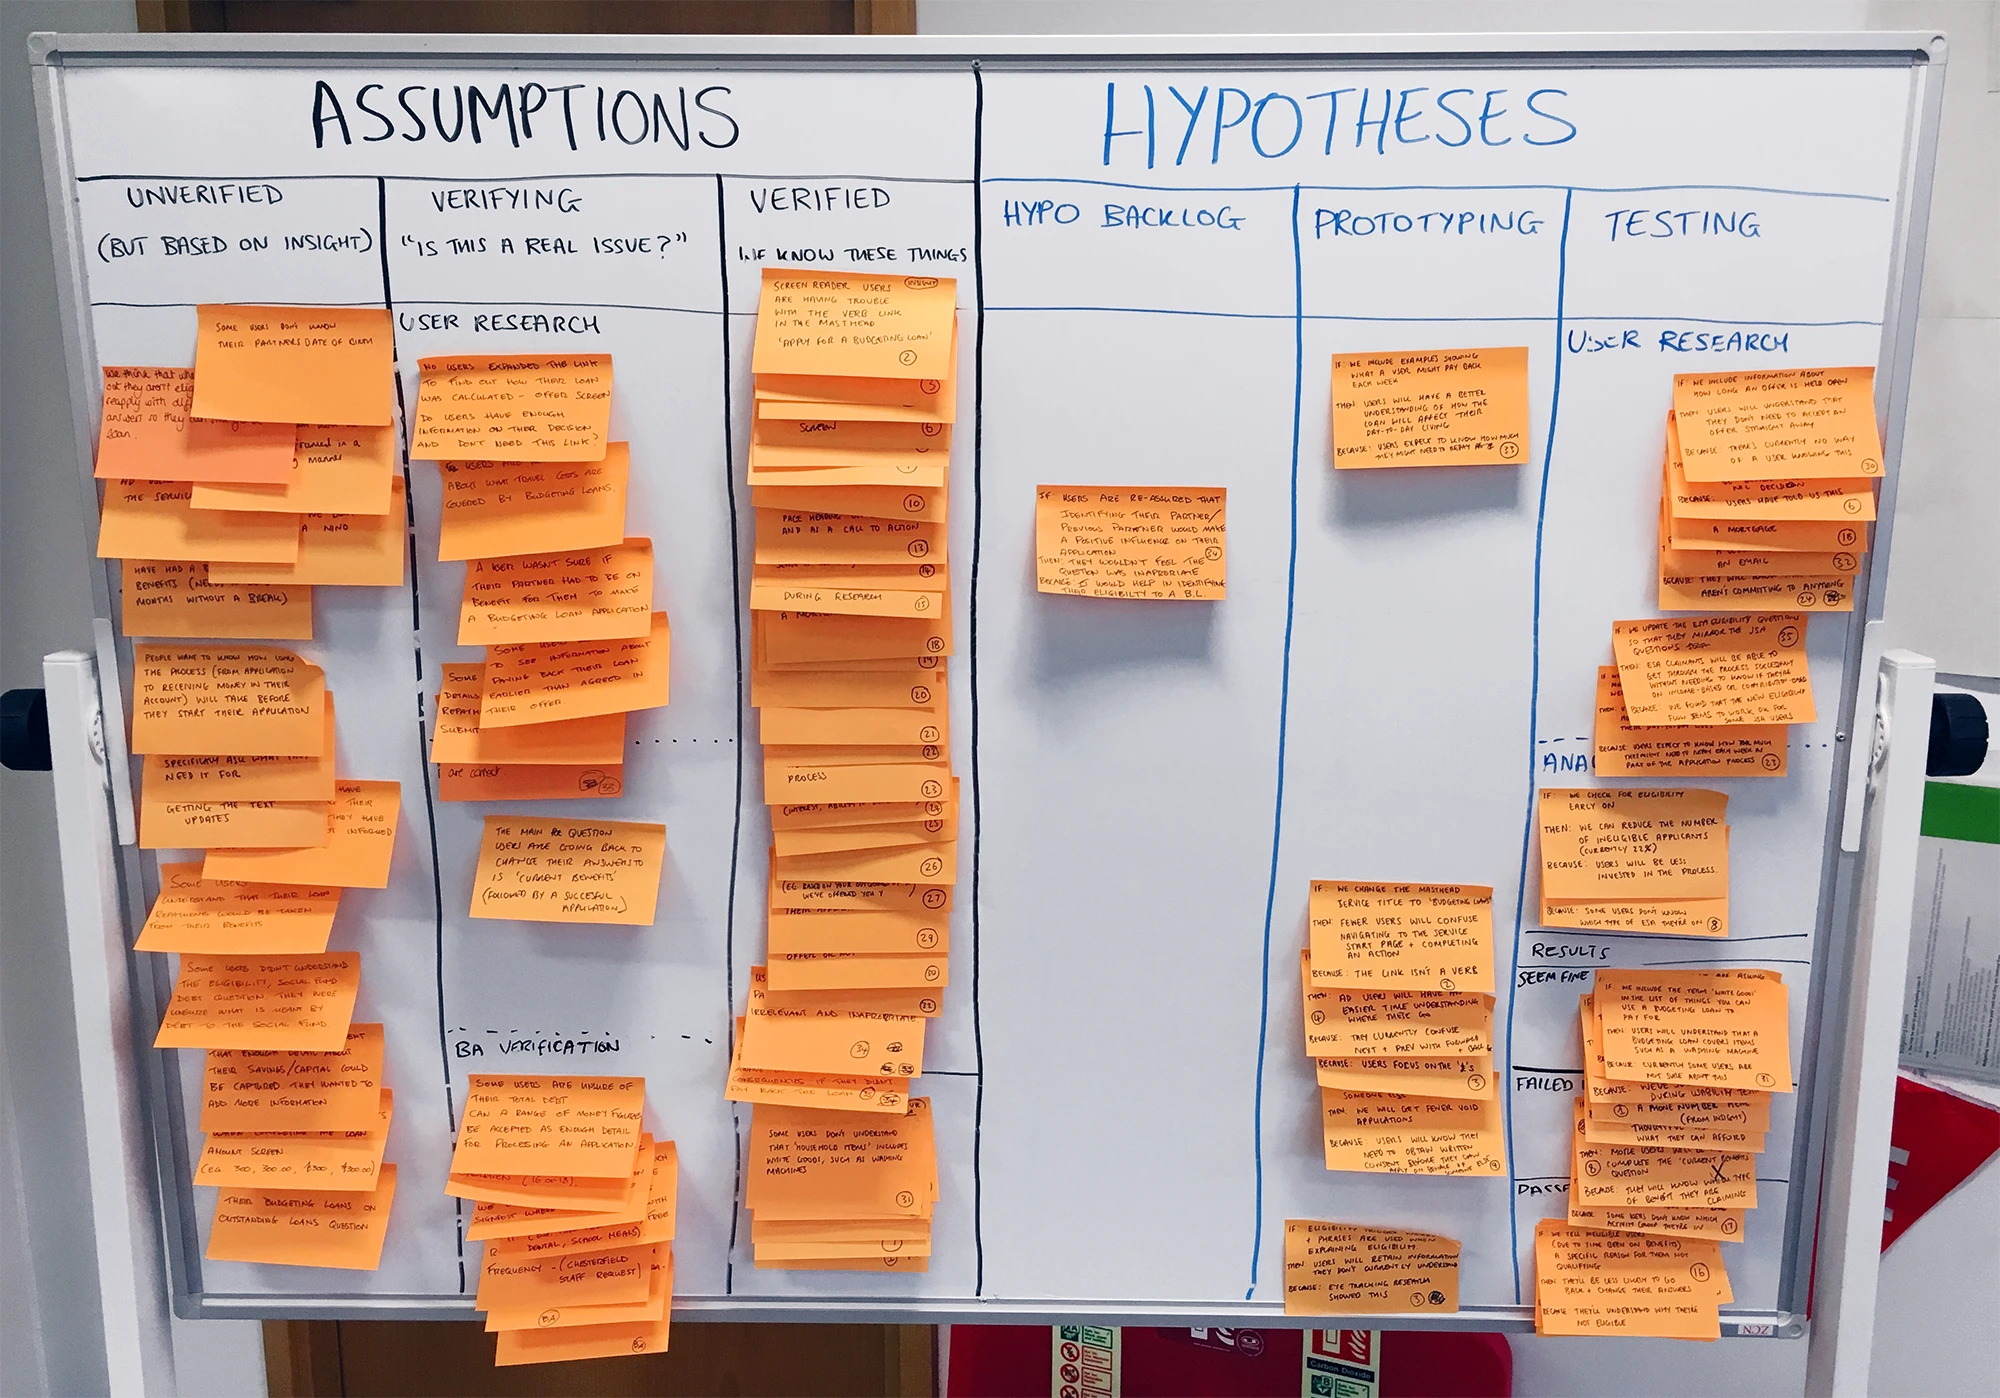 Photo of hypothesis board split into two halves: assumptions and hypotheses. The assumptions side is split into three columns: unverfied, verifying and verified. The hypotheses side is split into three columns: hypotheses backlog, prototyping and testing.